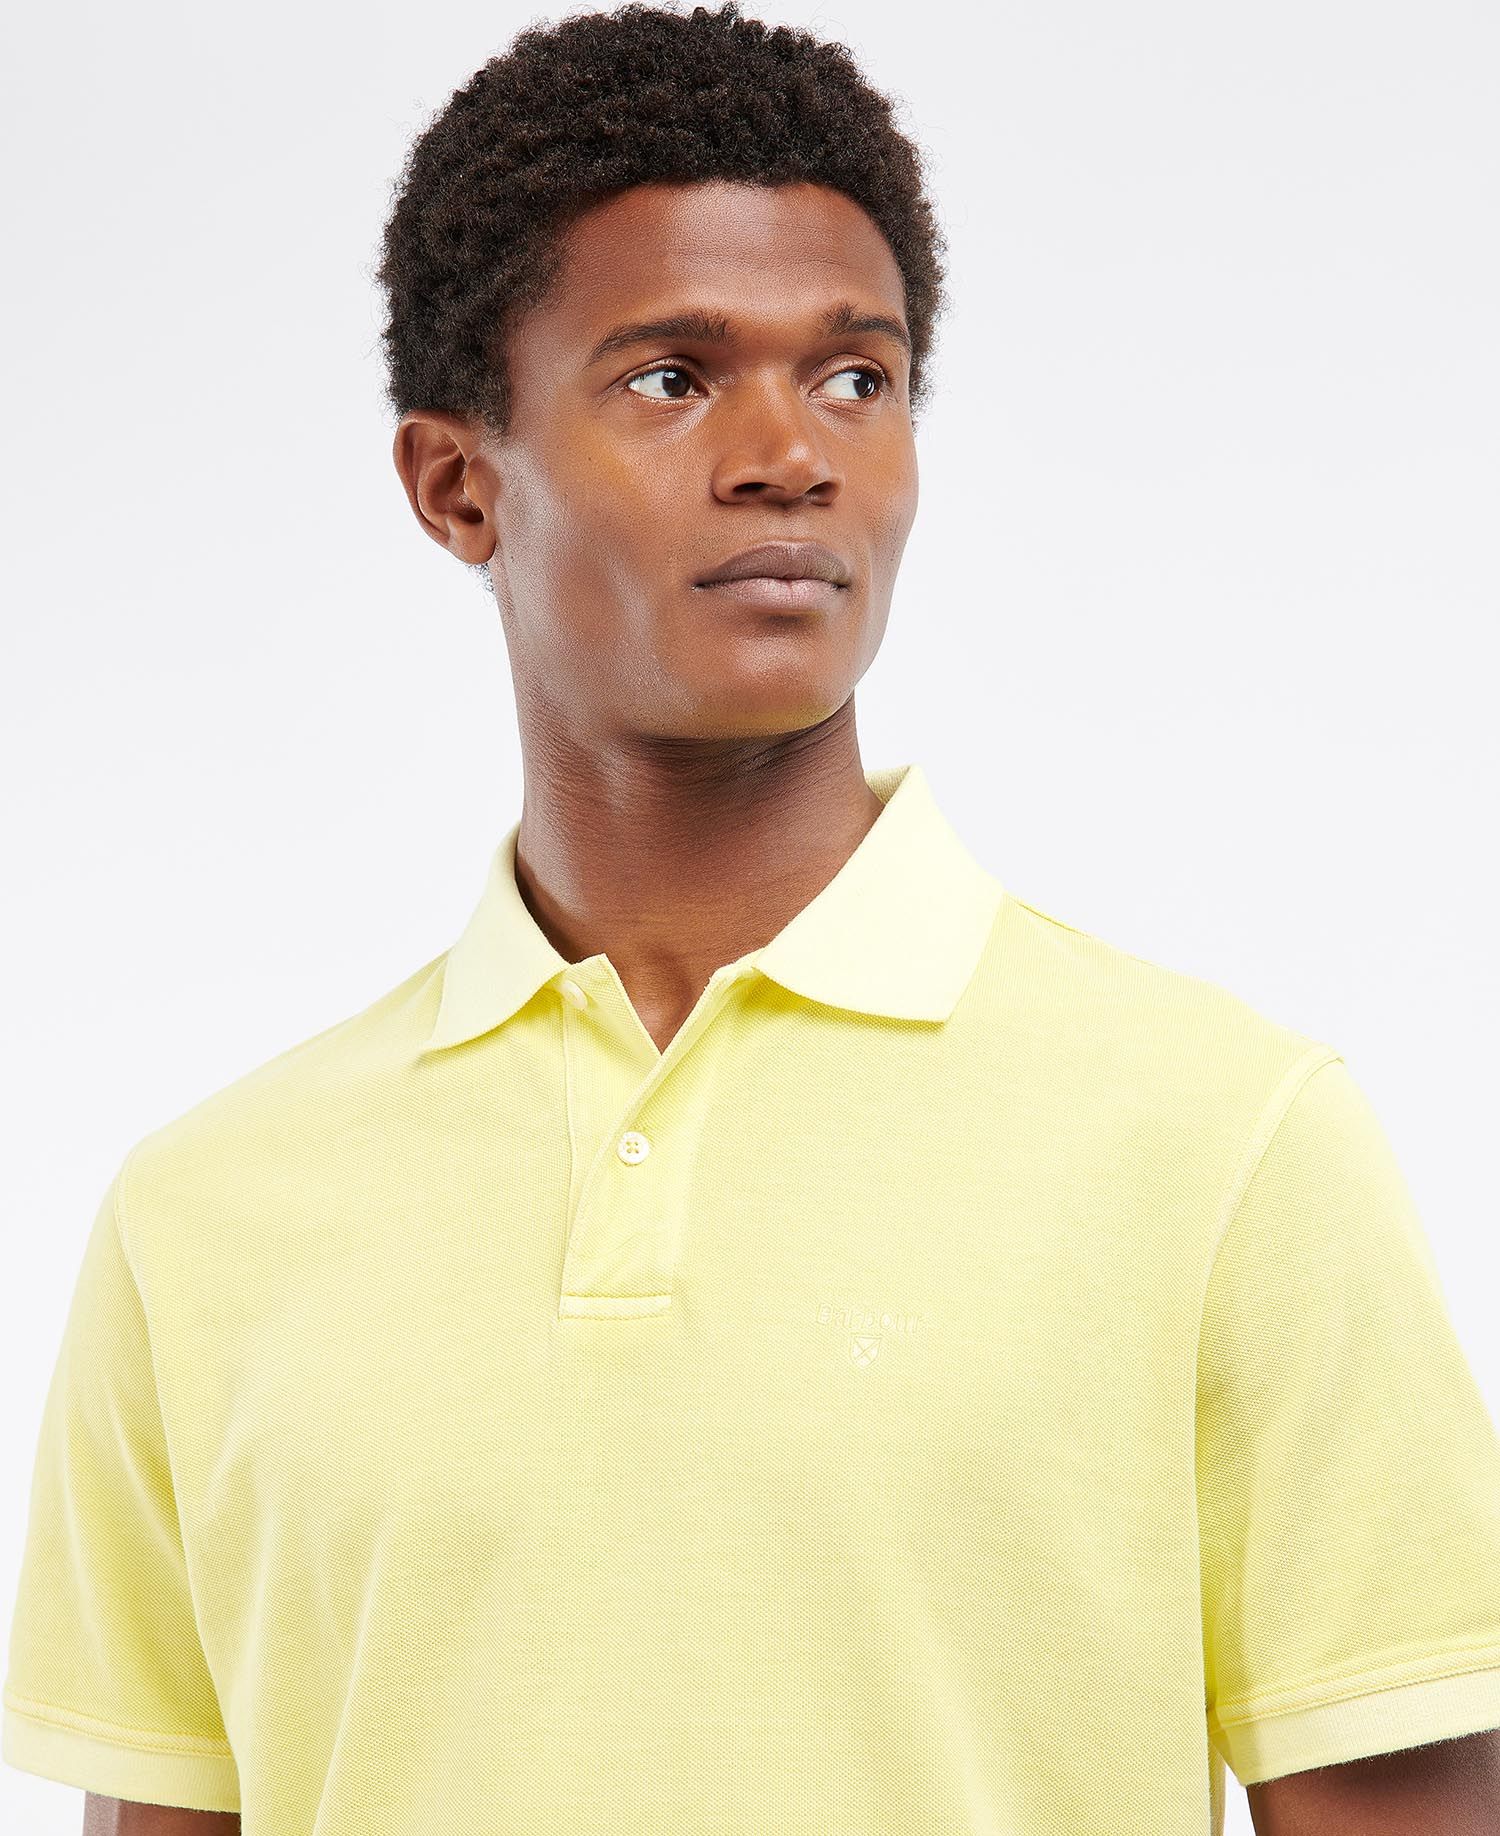 Barbour Washed Out Polo Shirt Yellow